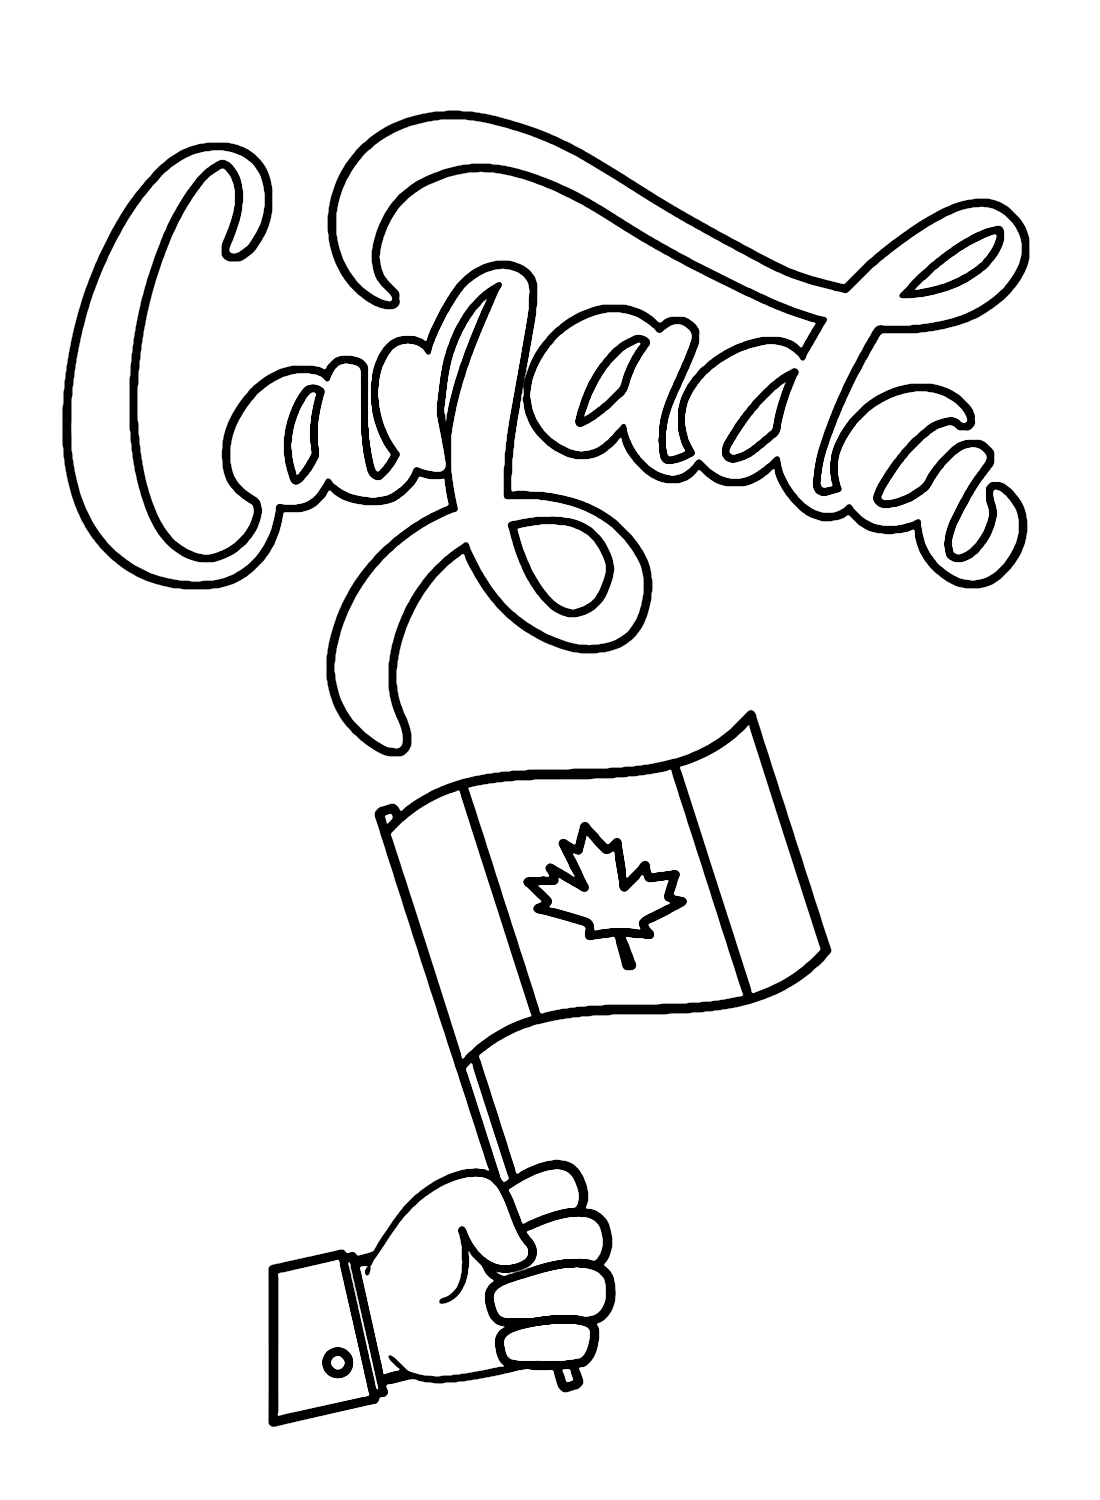 Happy Canada Day Free Coloring Page